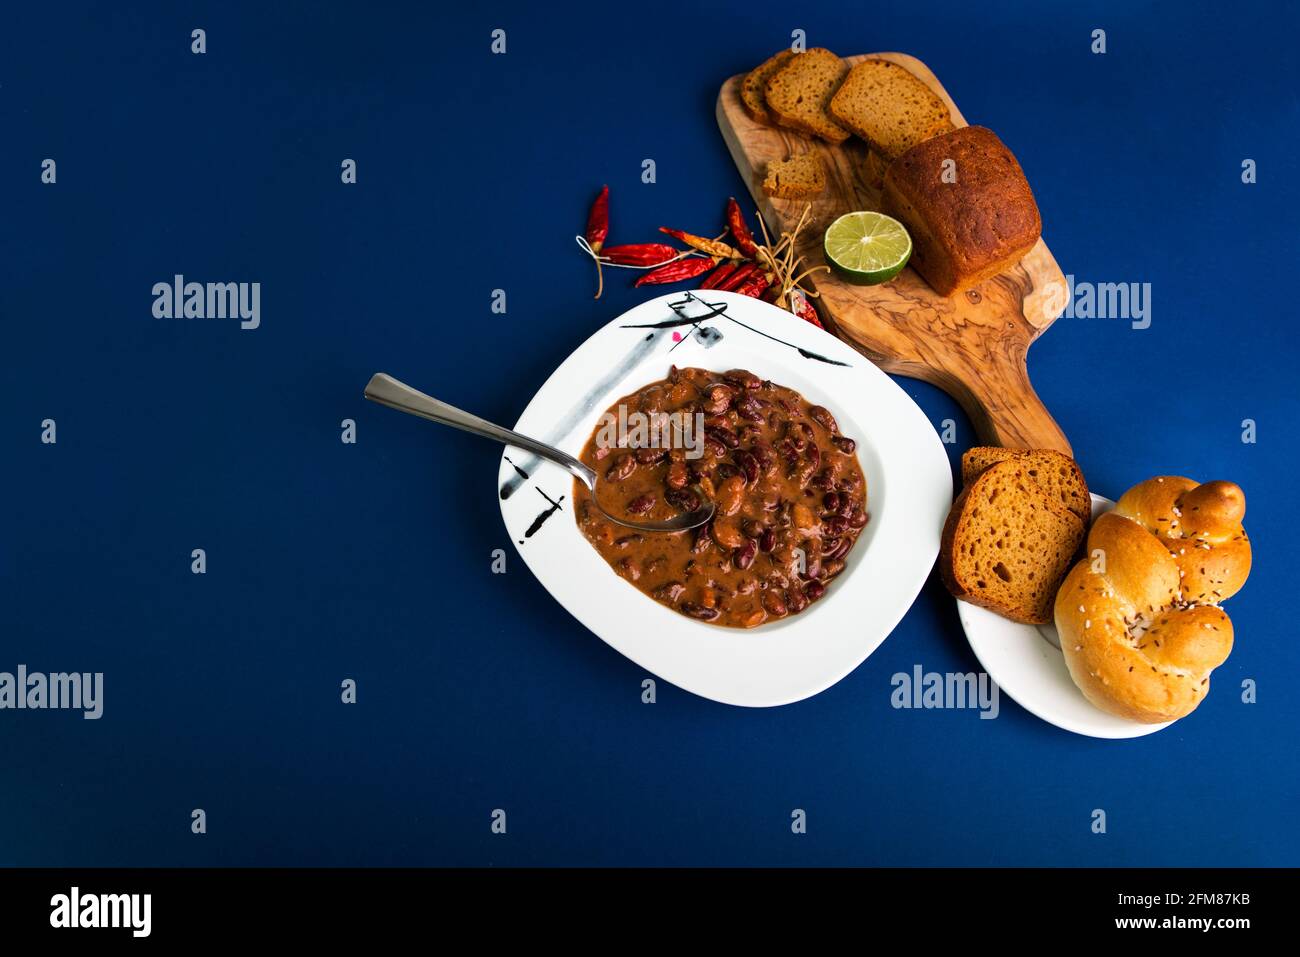 Bean soup in white plate, bread on kitchen board and plate, dried red peppers on blue background with big free space. Stock Photo